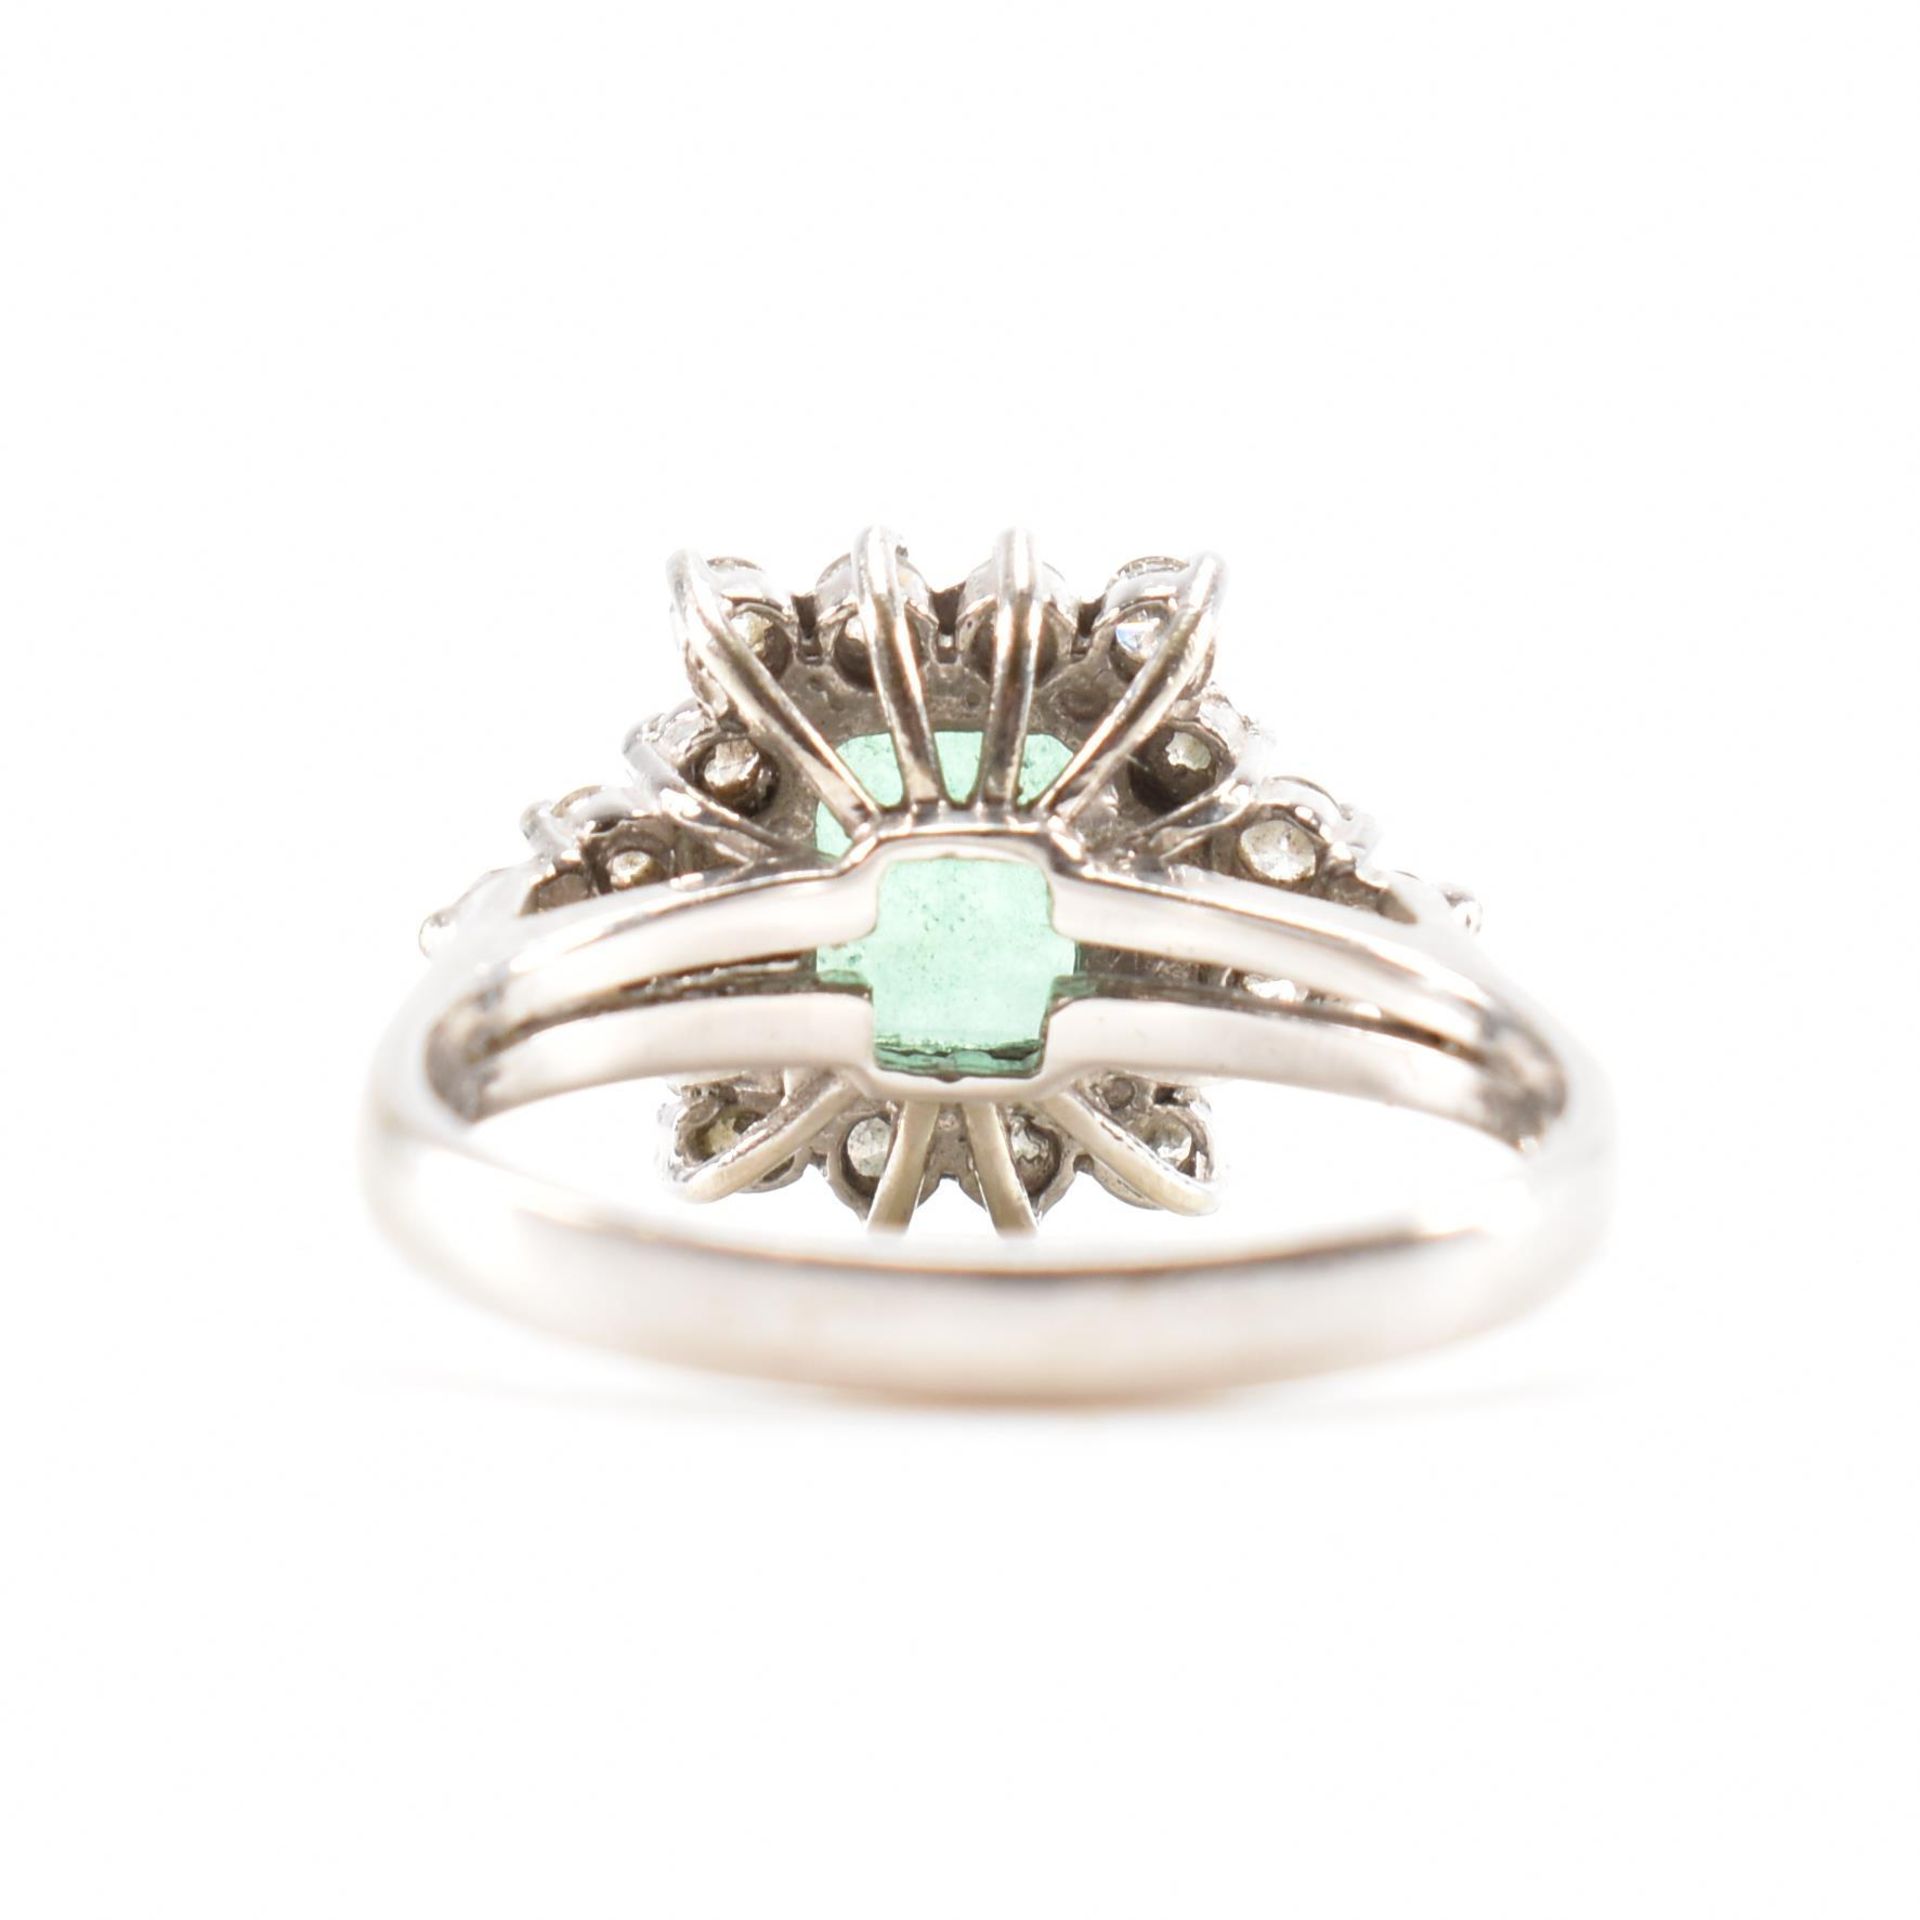 14CT WHITE GOLD EMERALD & DIAMOND CLUSTER RING - Image 4 of 8